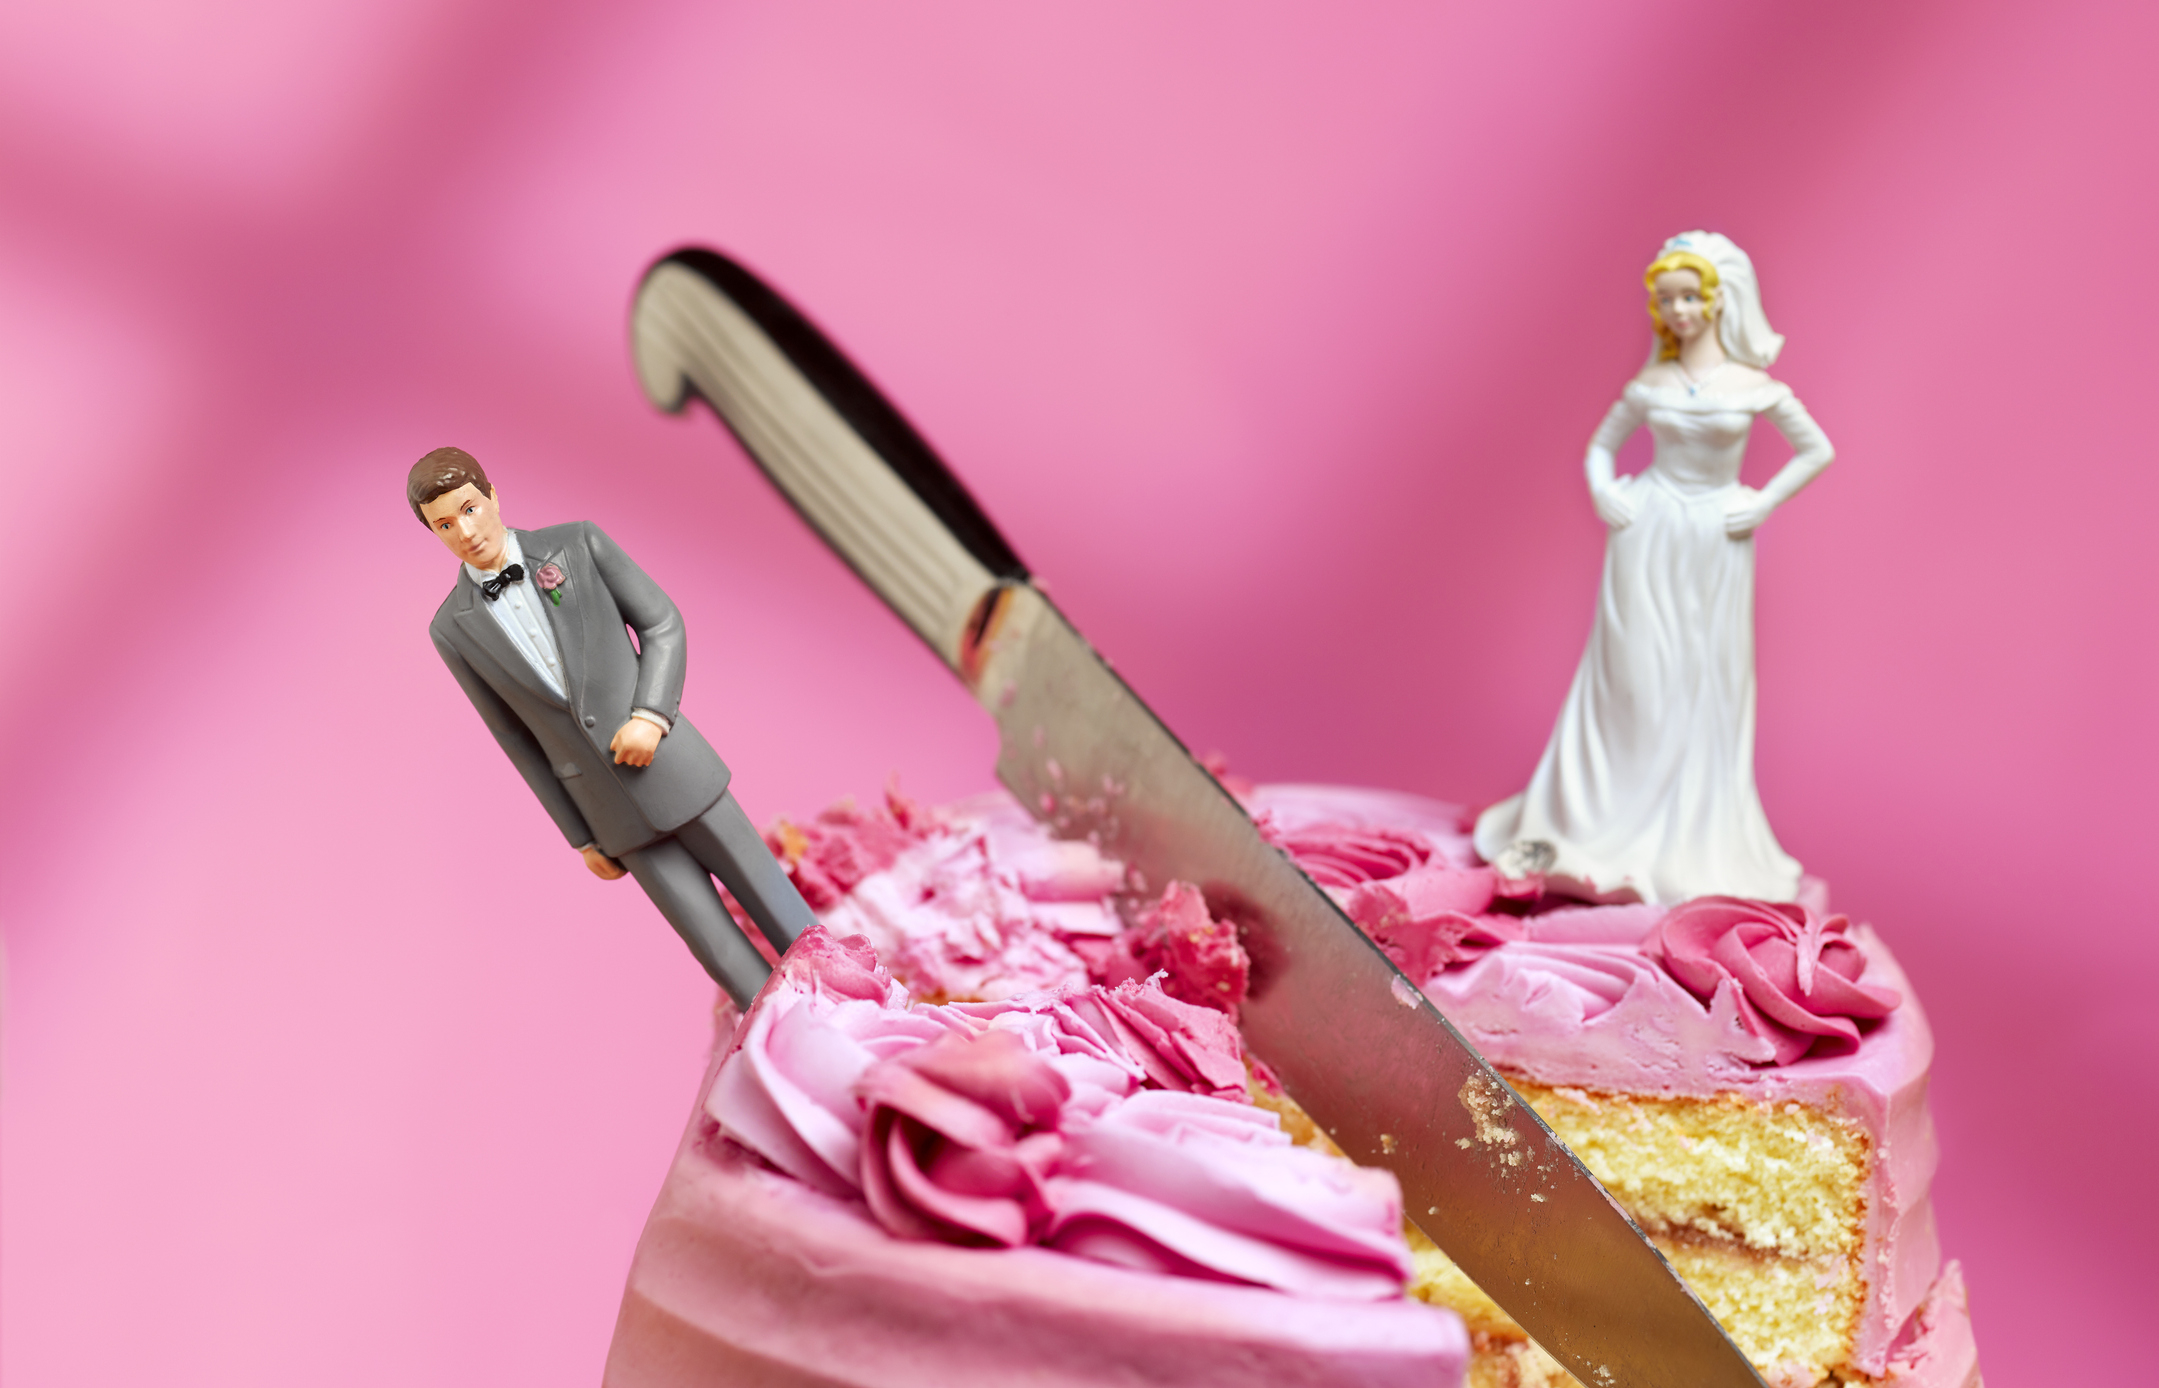 knife in a wedding cake splitting up the groom and bride figurines